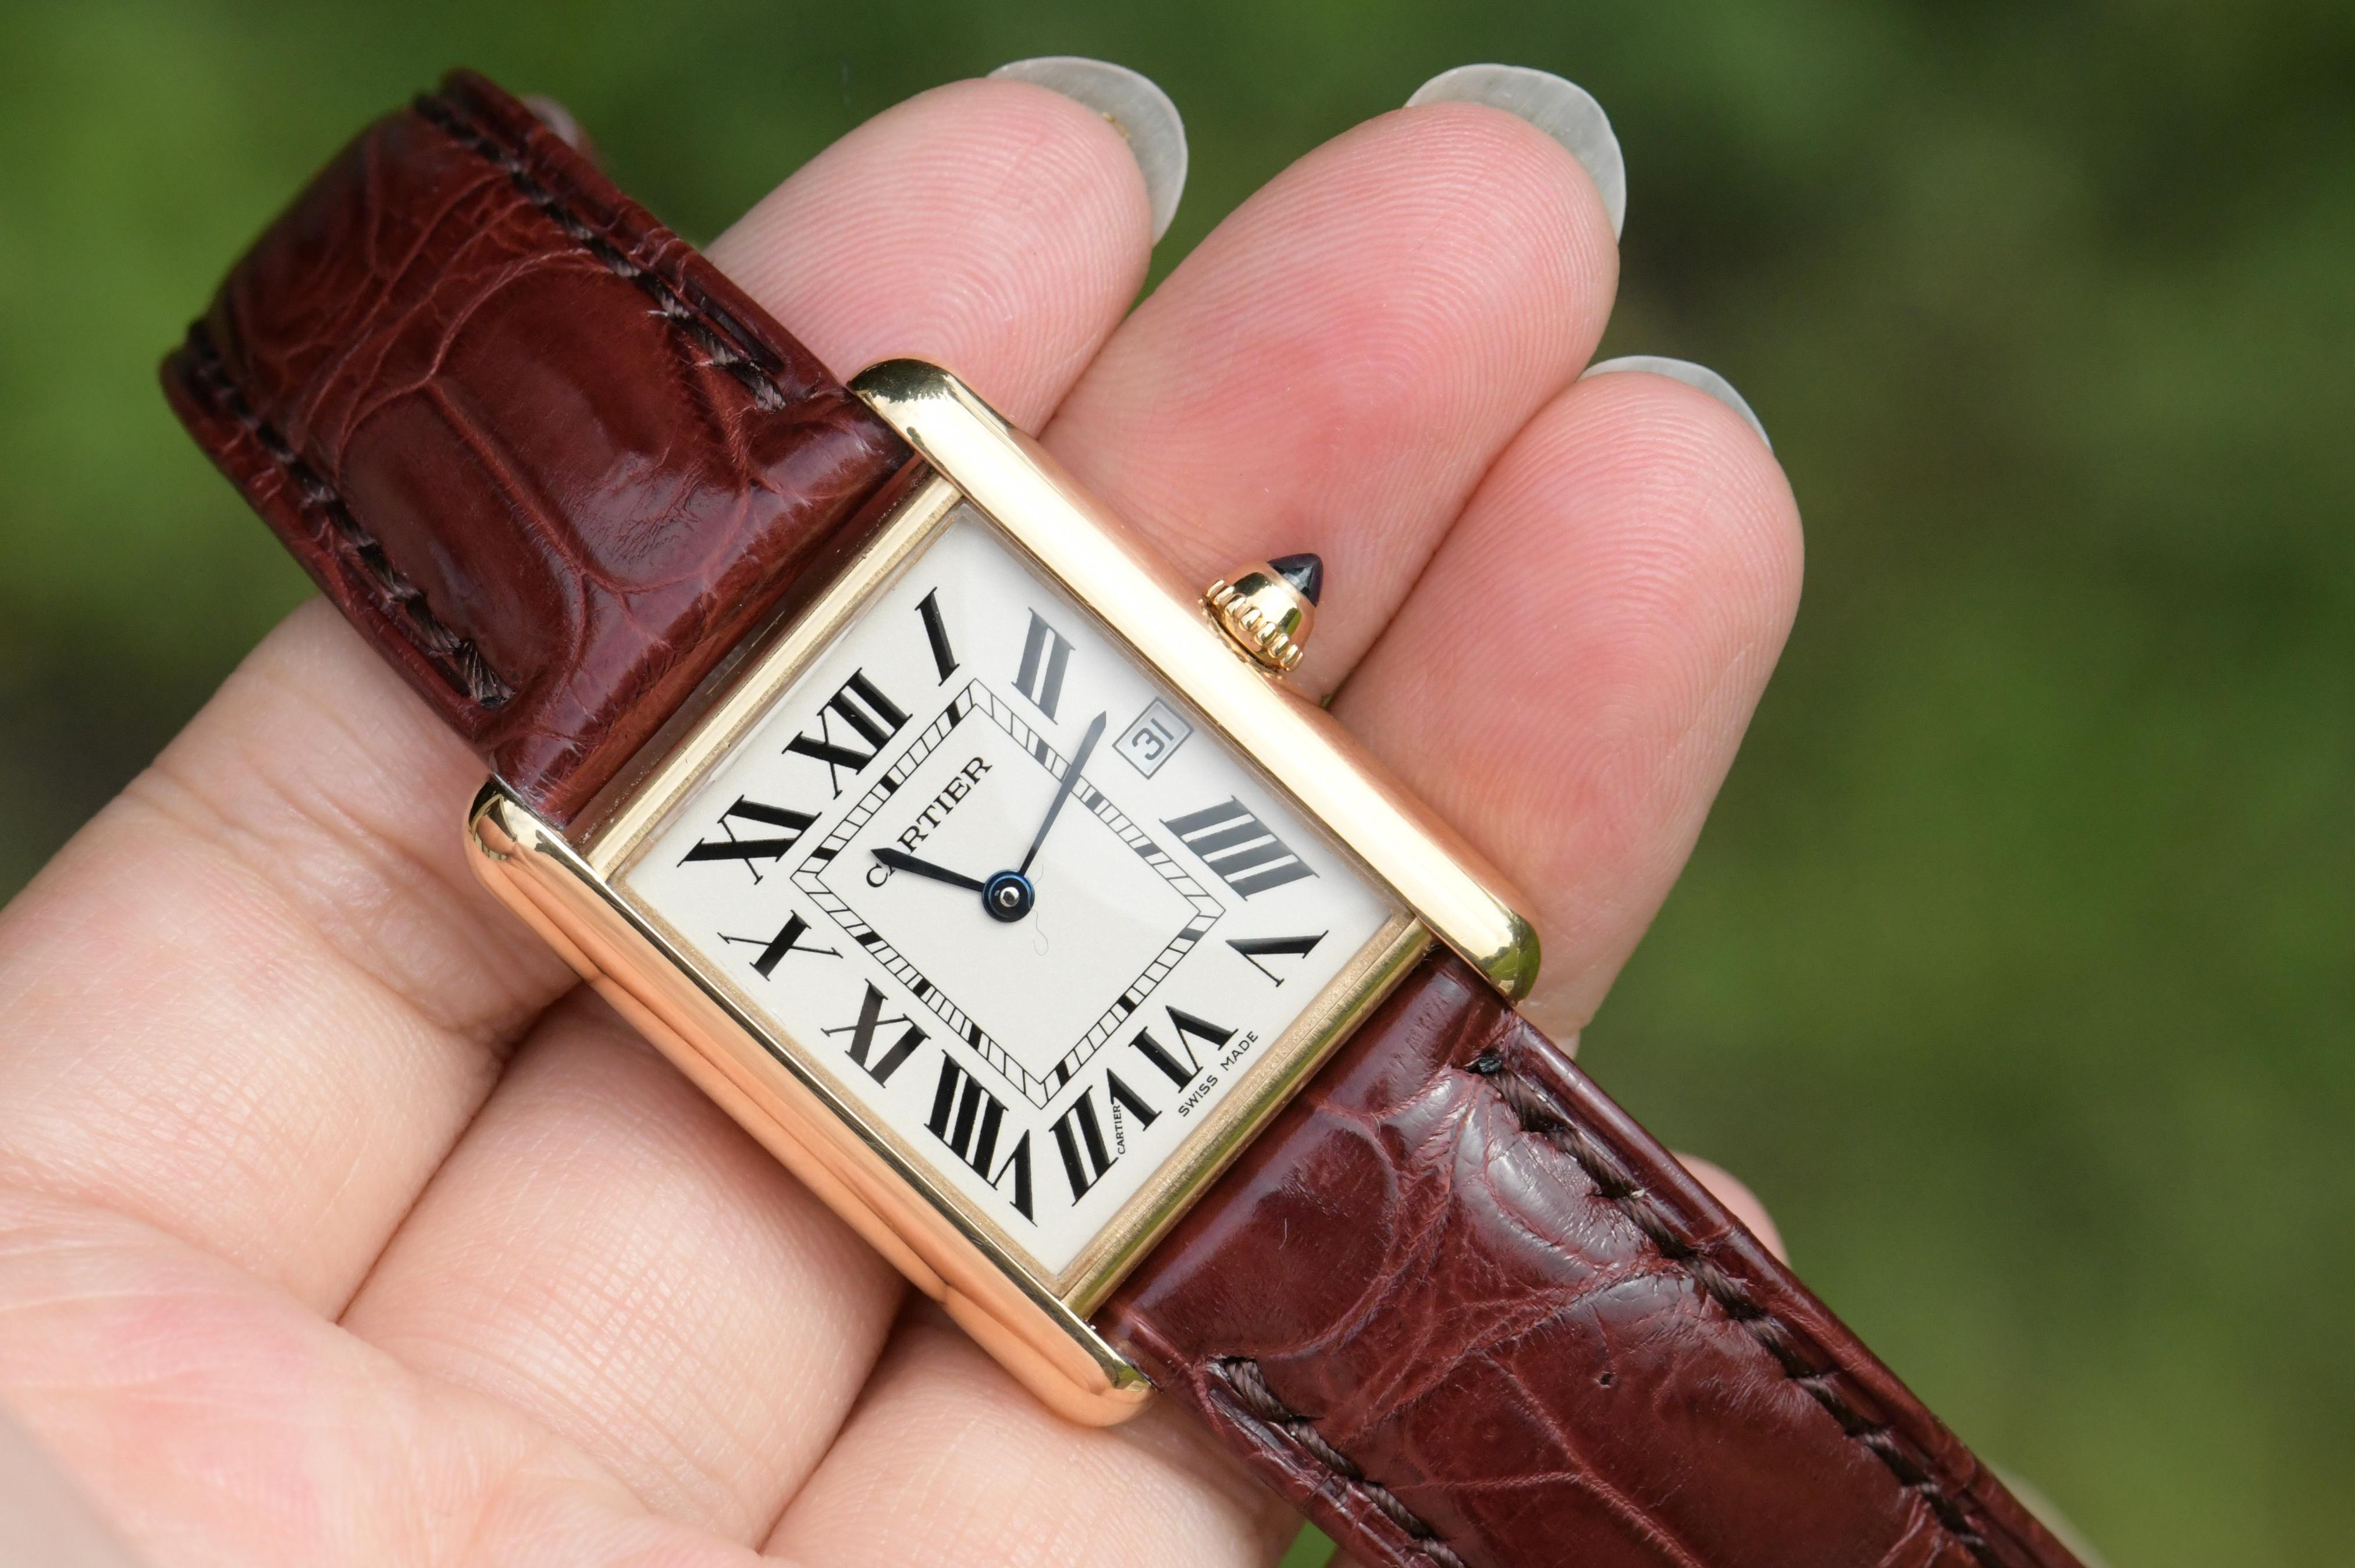 Dandelion Antiques Code	  AT-0791
Brand	                                  Cartier
Model No.	                          W1529756
Retail Price                                £9,000 / $12500
____________________________________

Date	                   